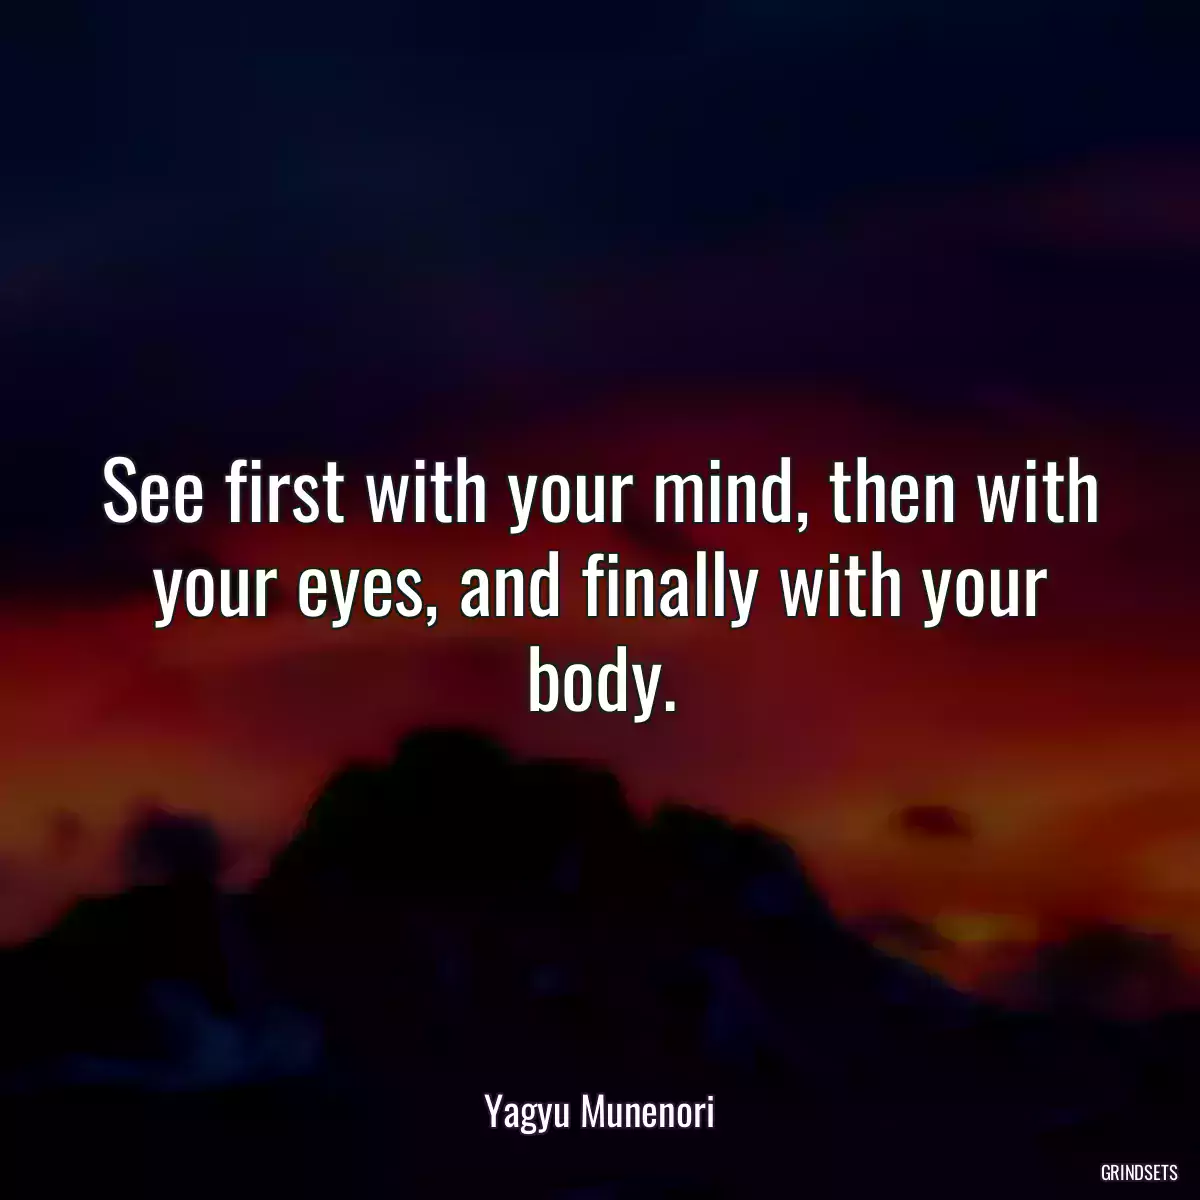 See first with your mind, then with your eyes, and finally with your body.